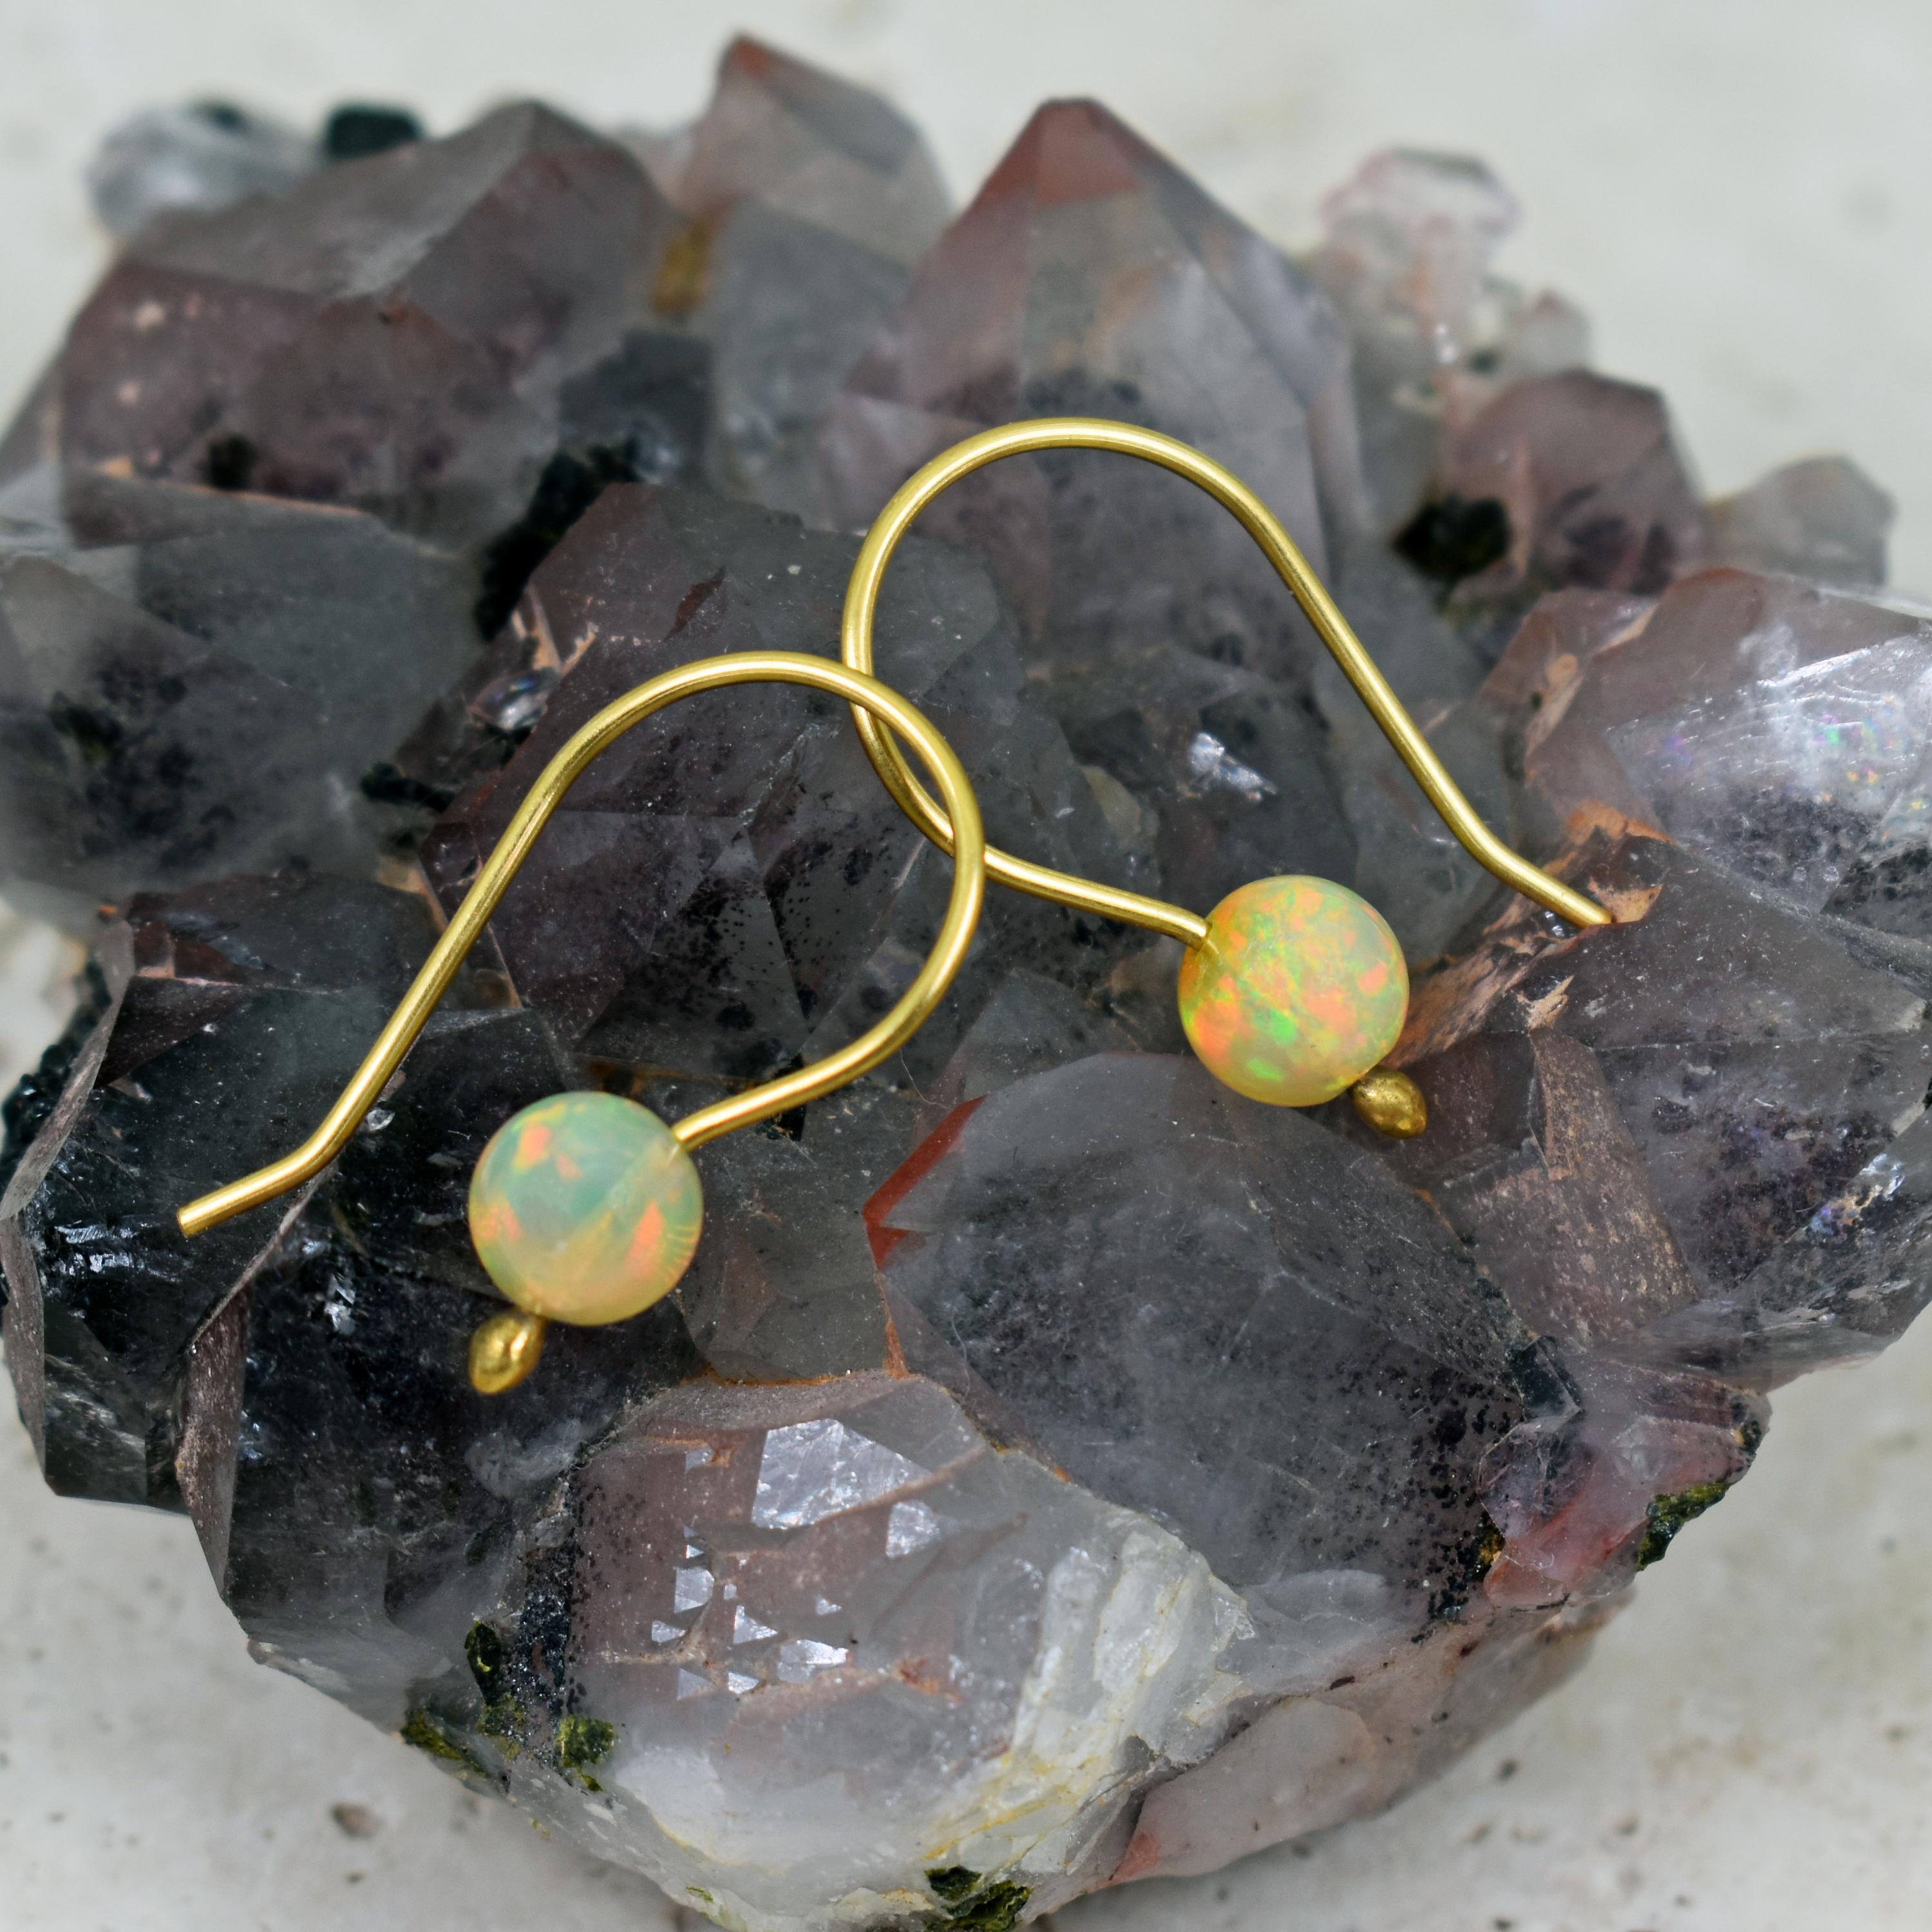 Gorgeous Ethiopian Opal bead 18k yellow gold wire drop earrings. Drop earrings are 1 inch in length. Beautiful, fiery Opals in this minimal style earring makes this pair lightweight and very wearable.